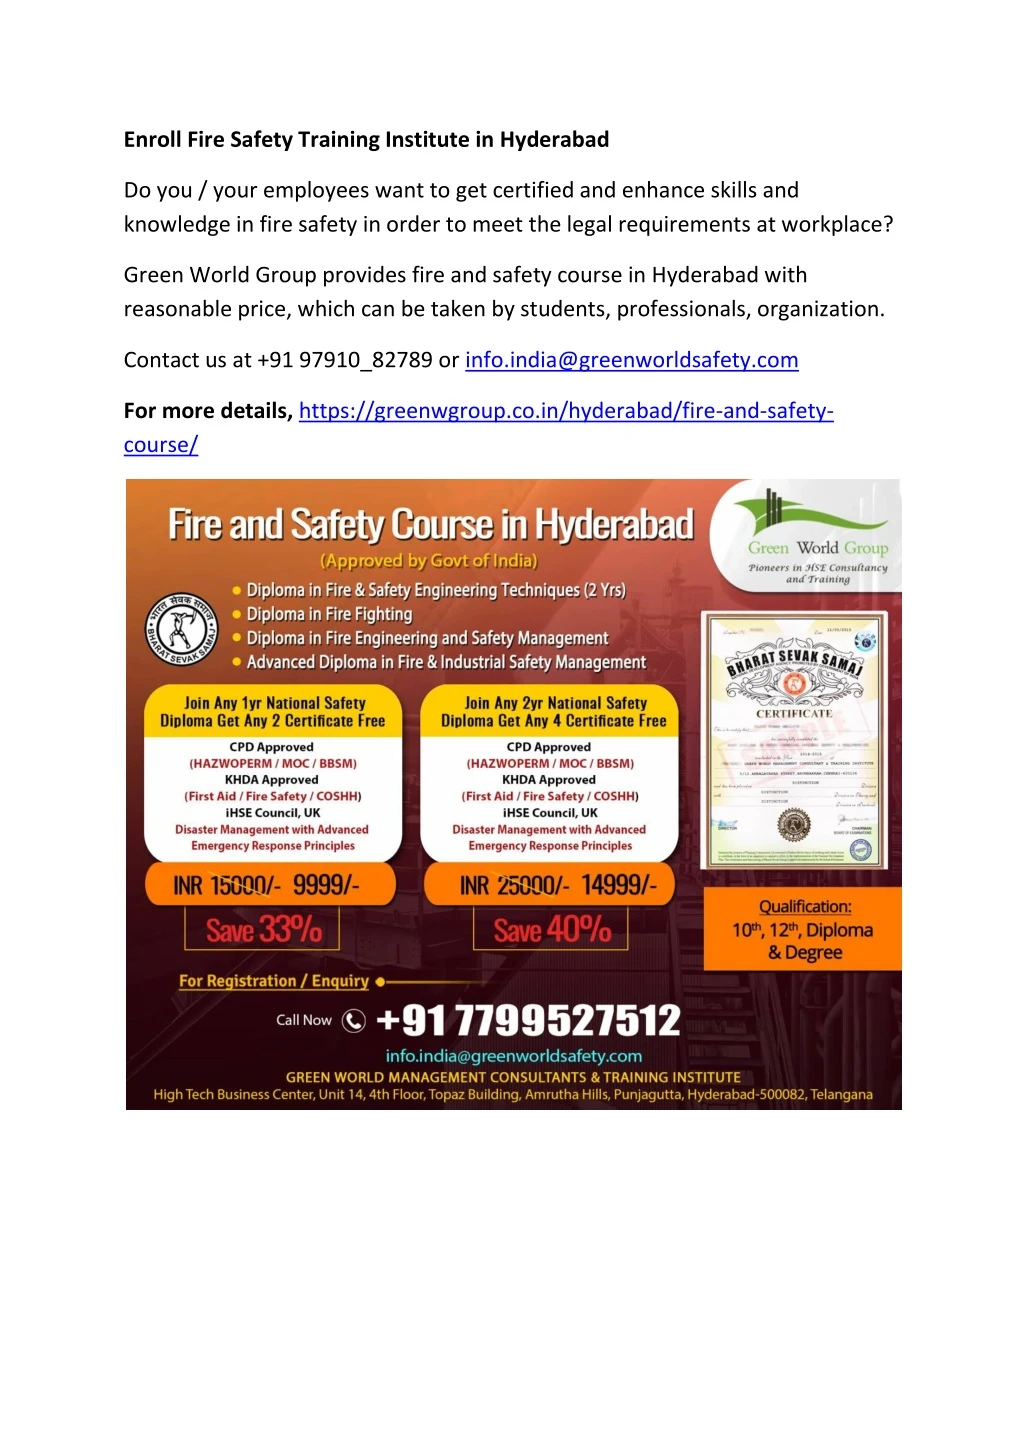 enroll fire safety training institute in hyderabad